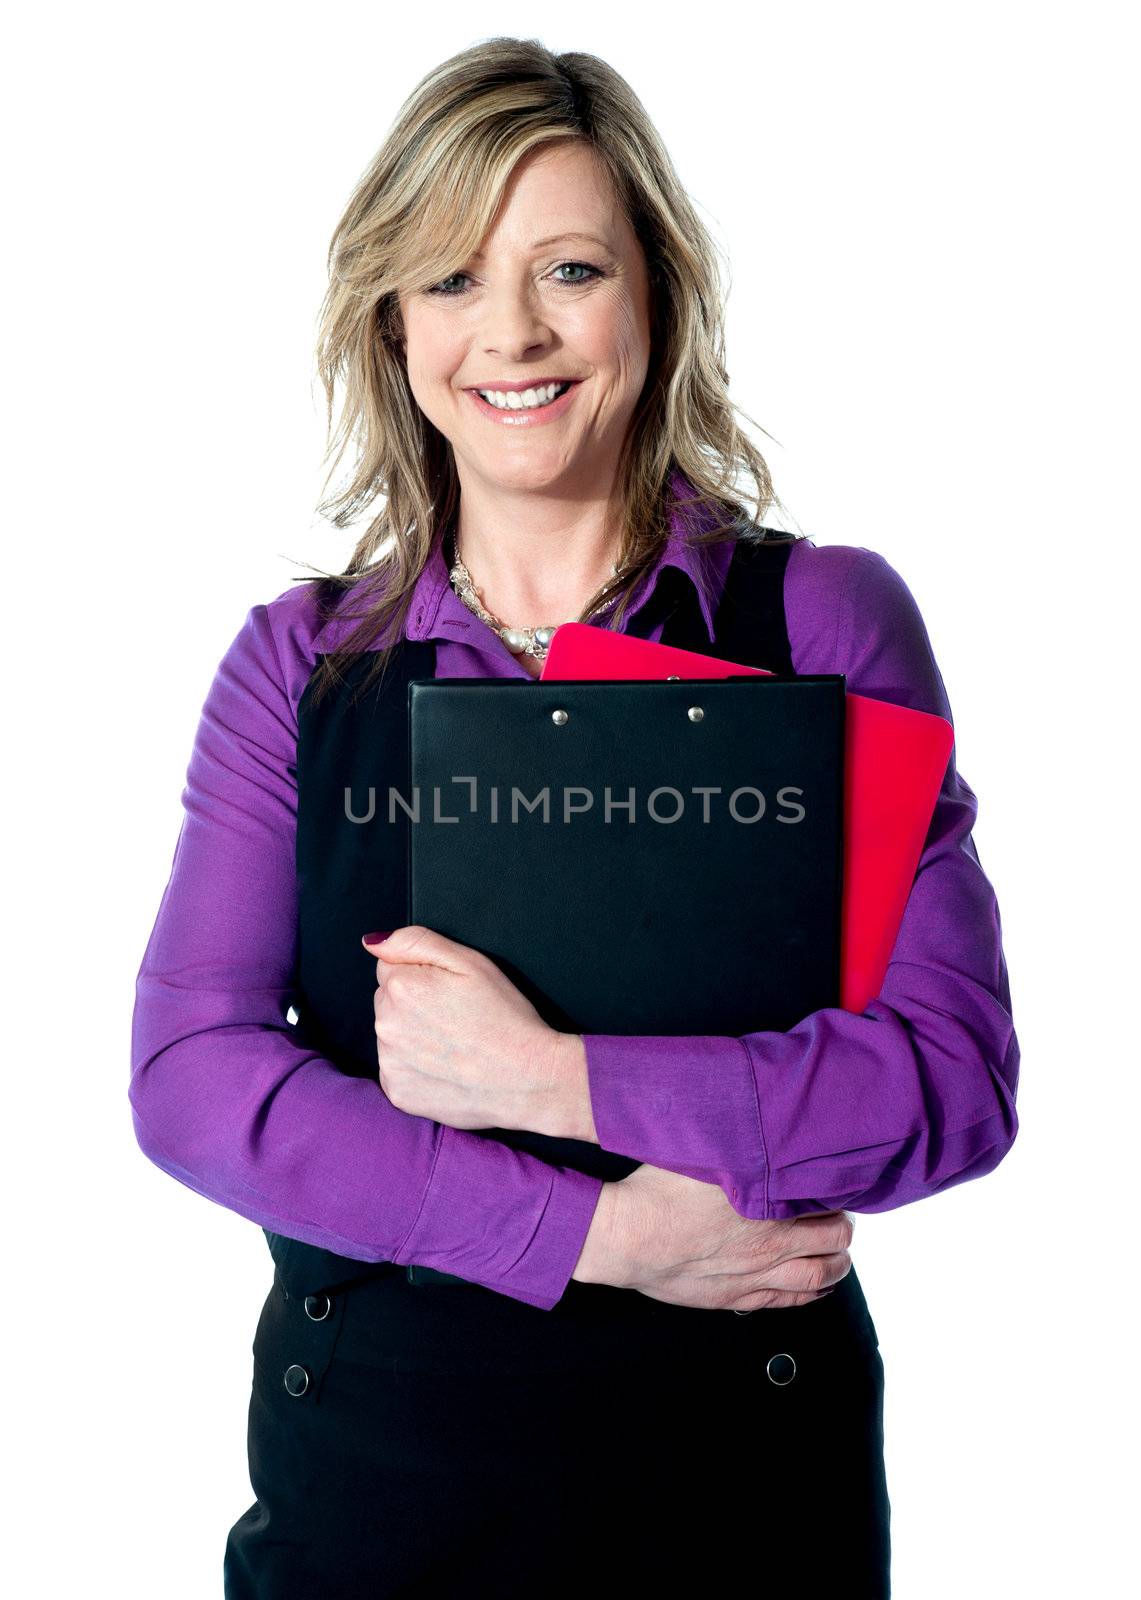 Corporate woman holding documents tightly, smiling at camera